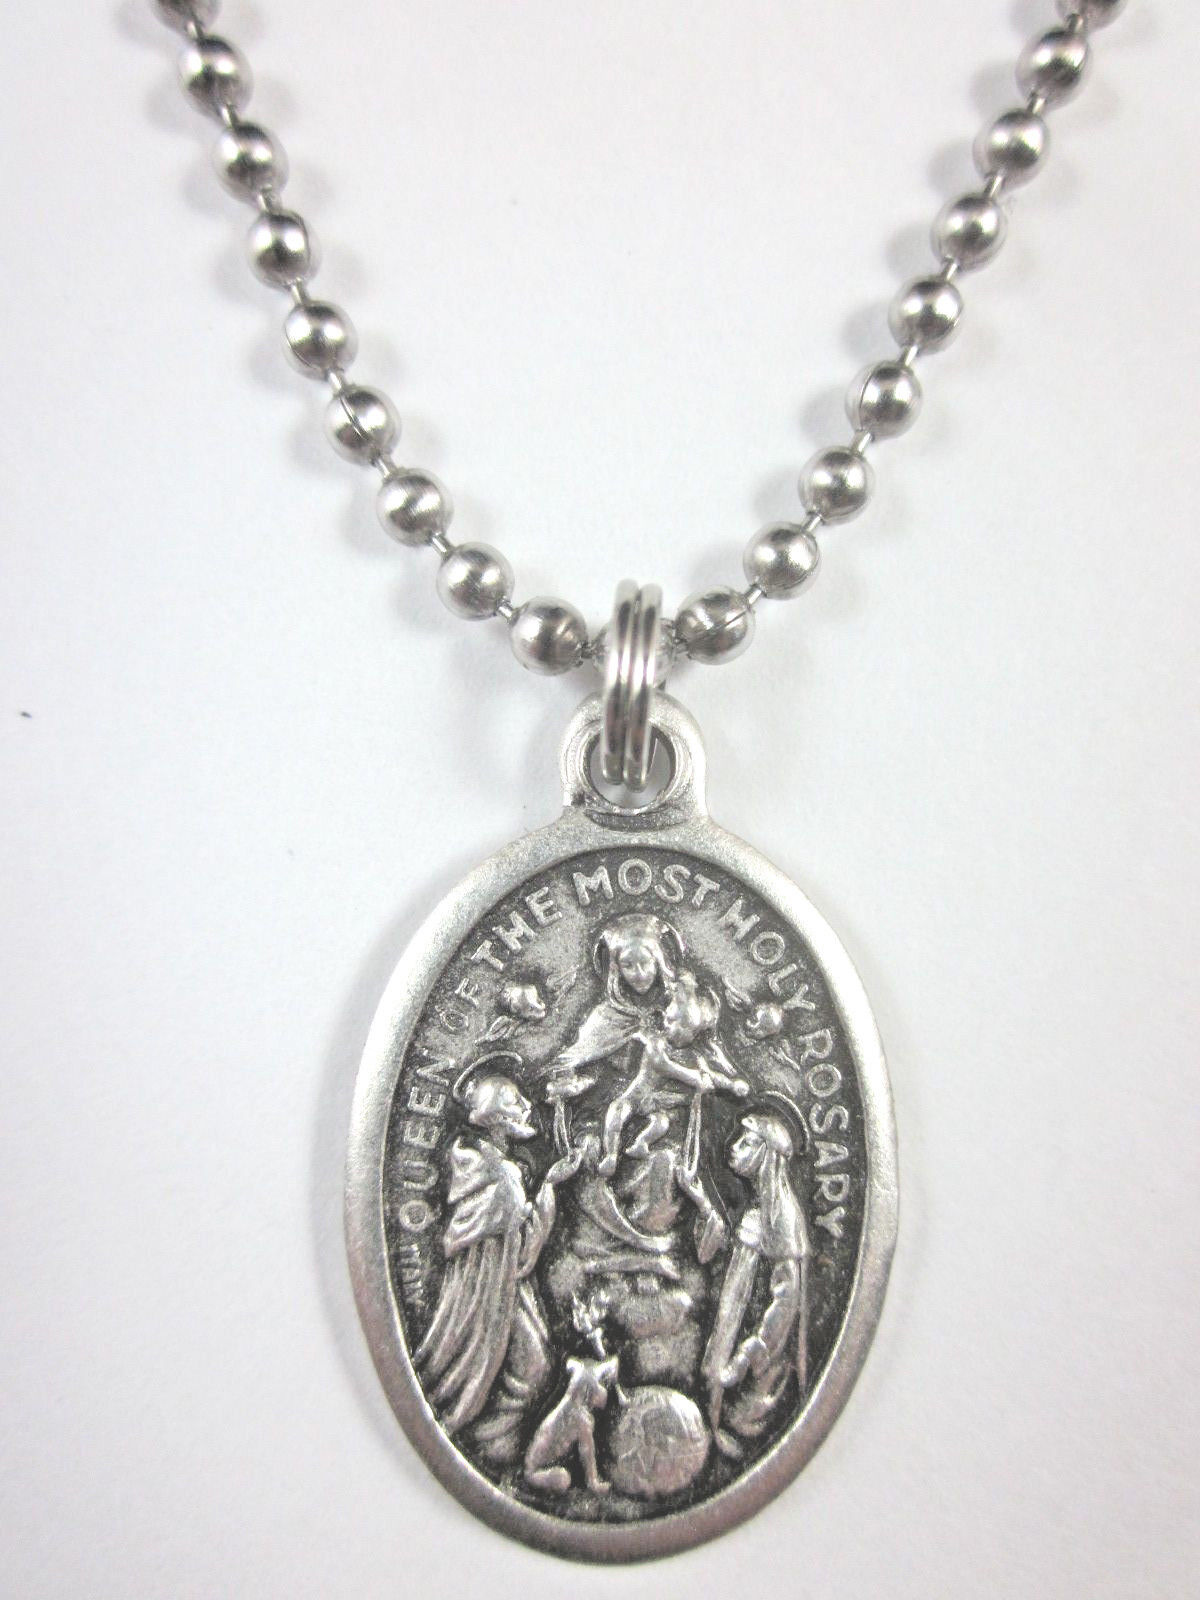 Queen of the Most Holy Rosary Medal Pendant Necklace 24\